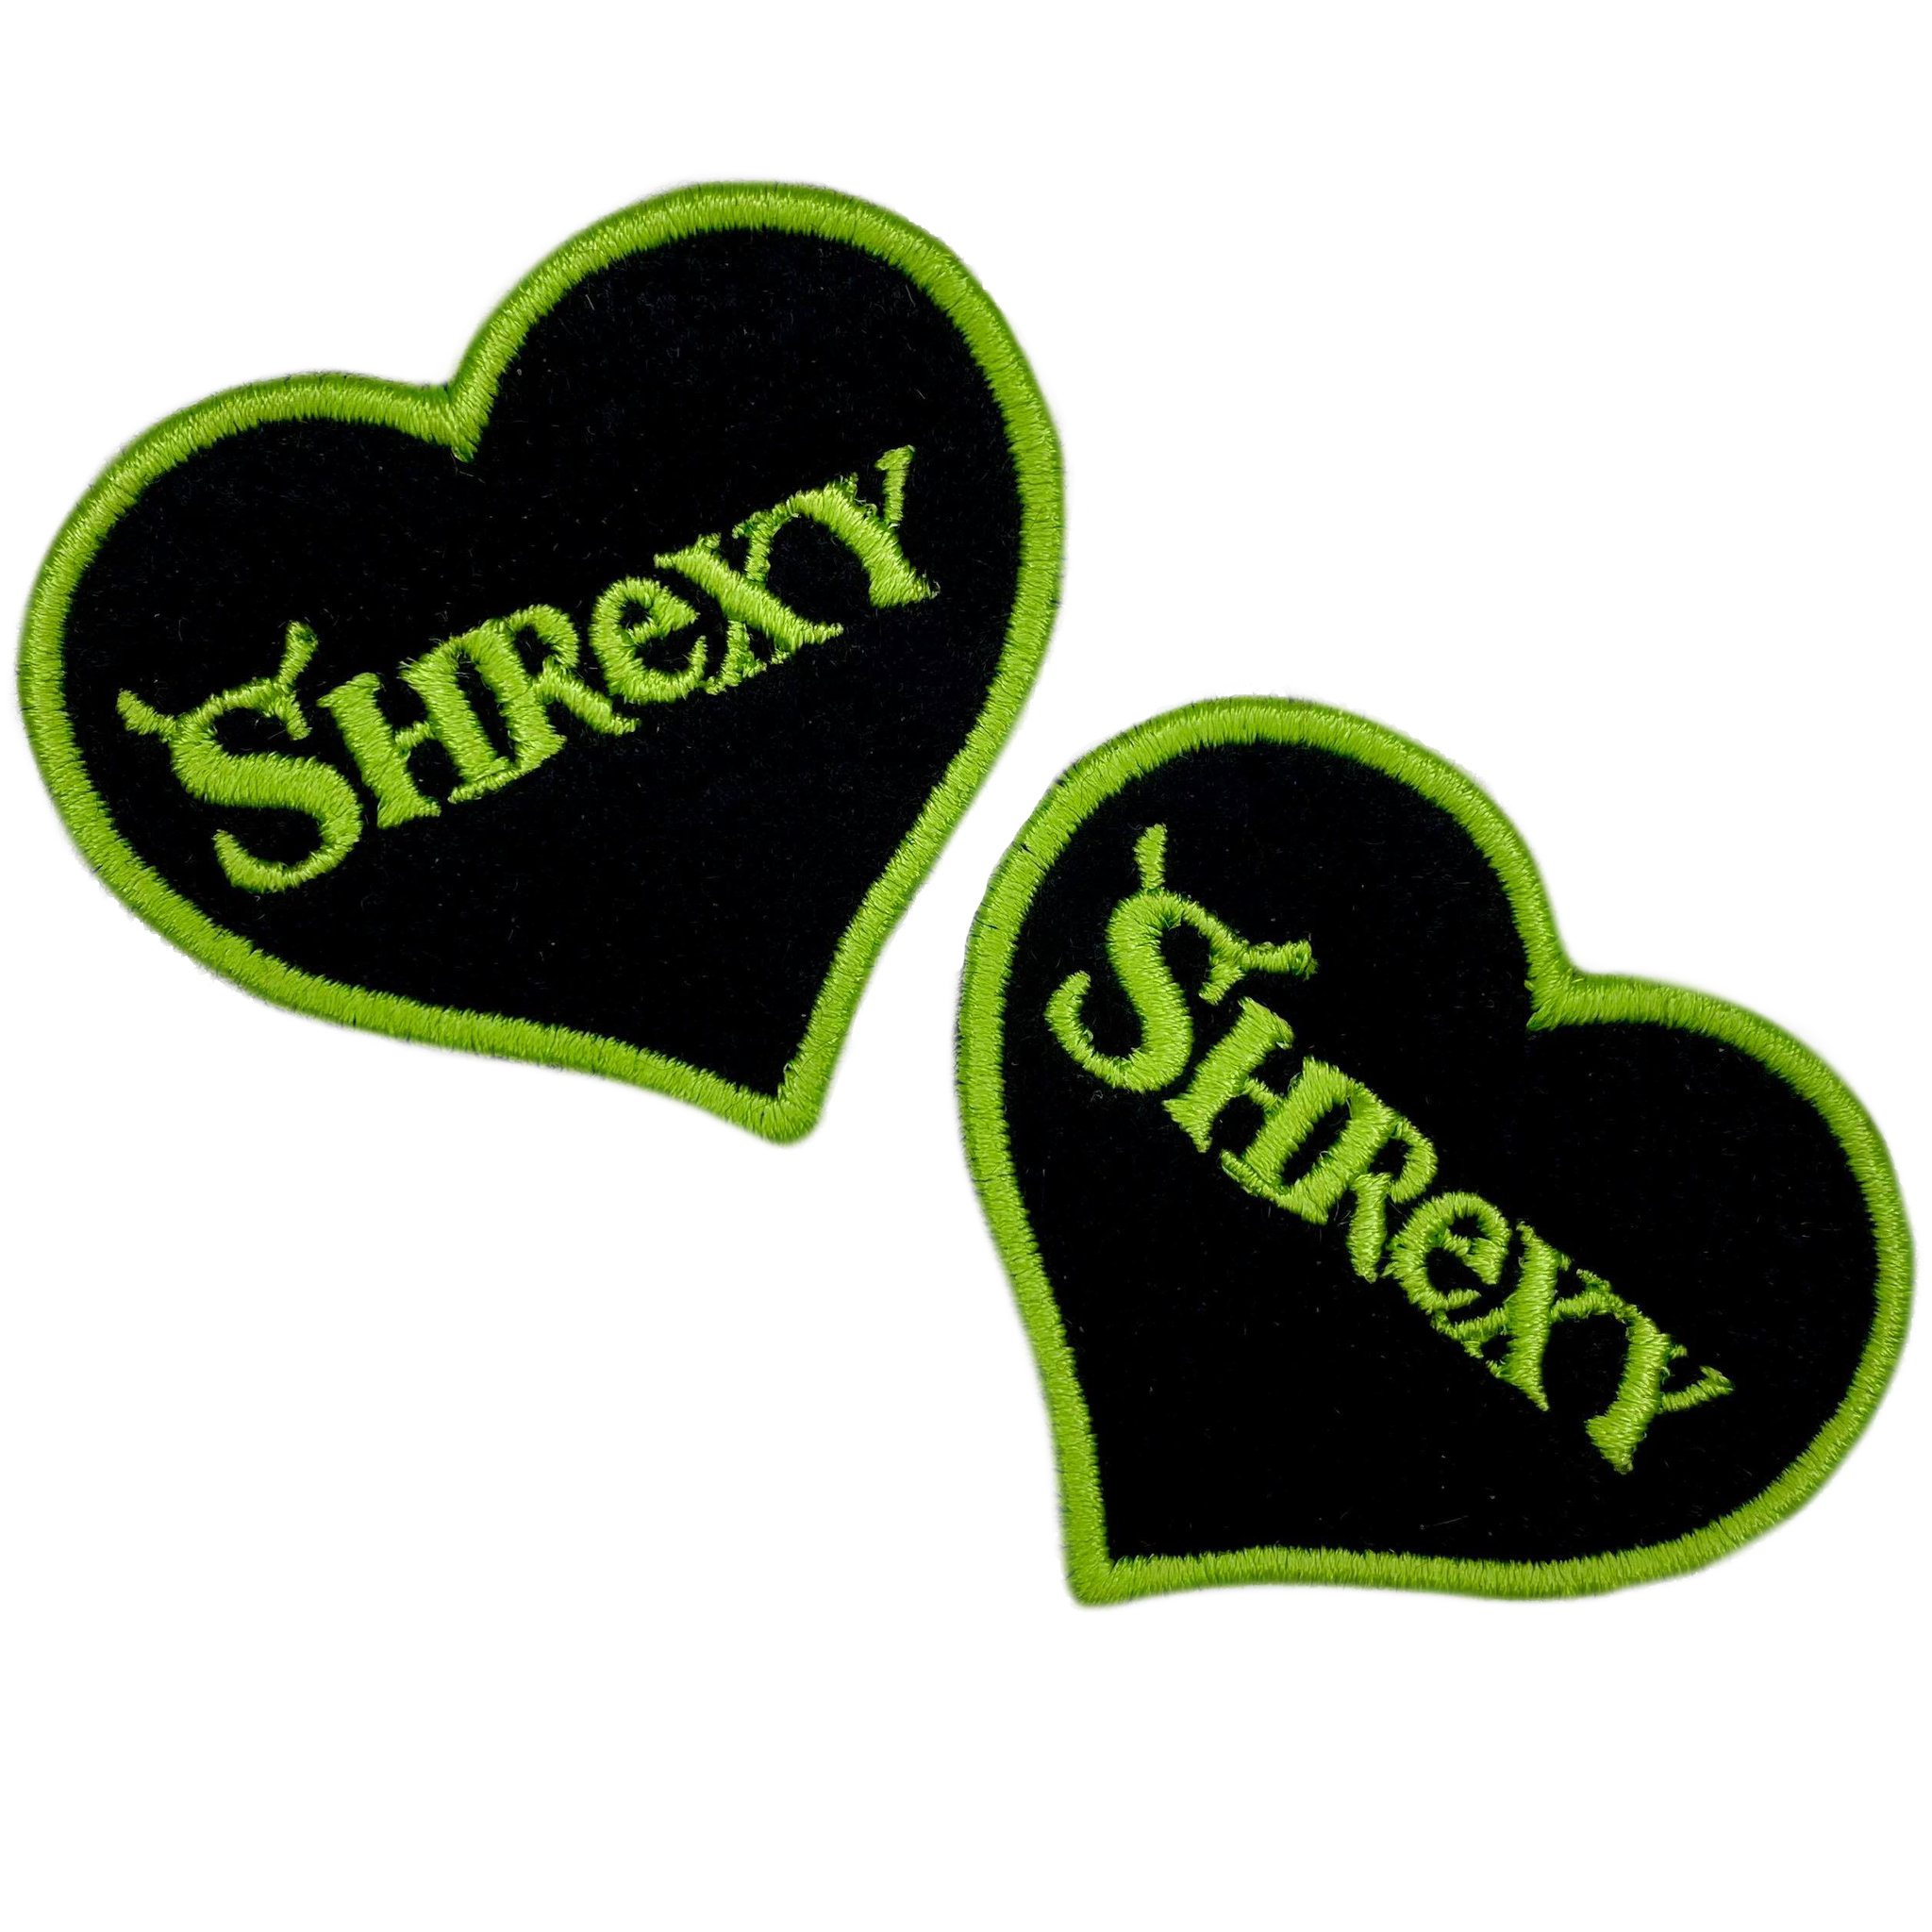 Shrexy Embroidered Iron-on Patch - IncredibleGood Inc